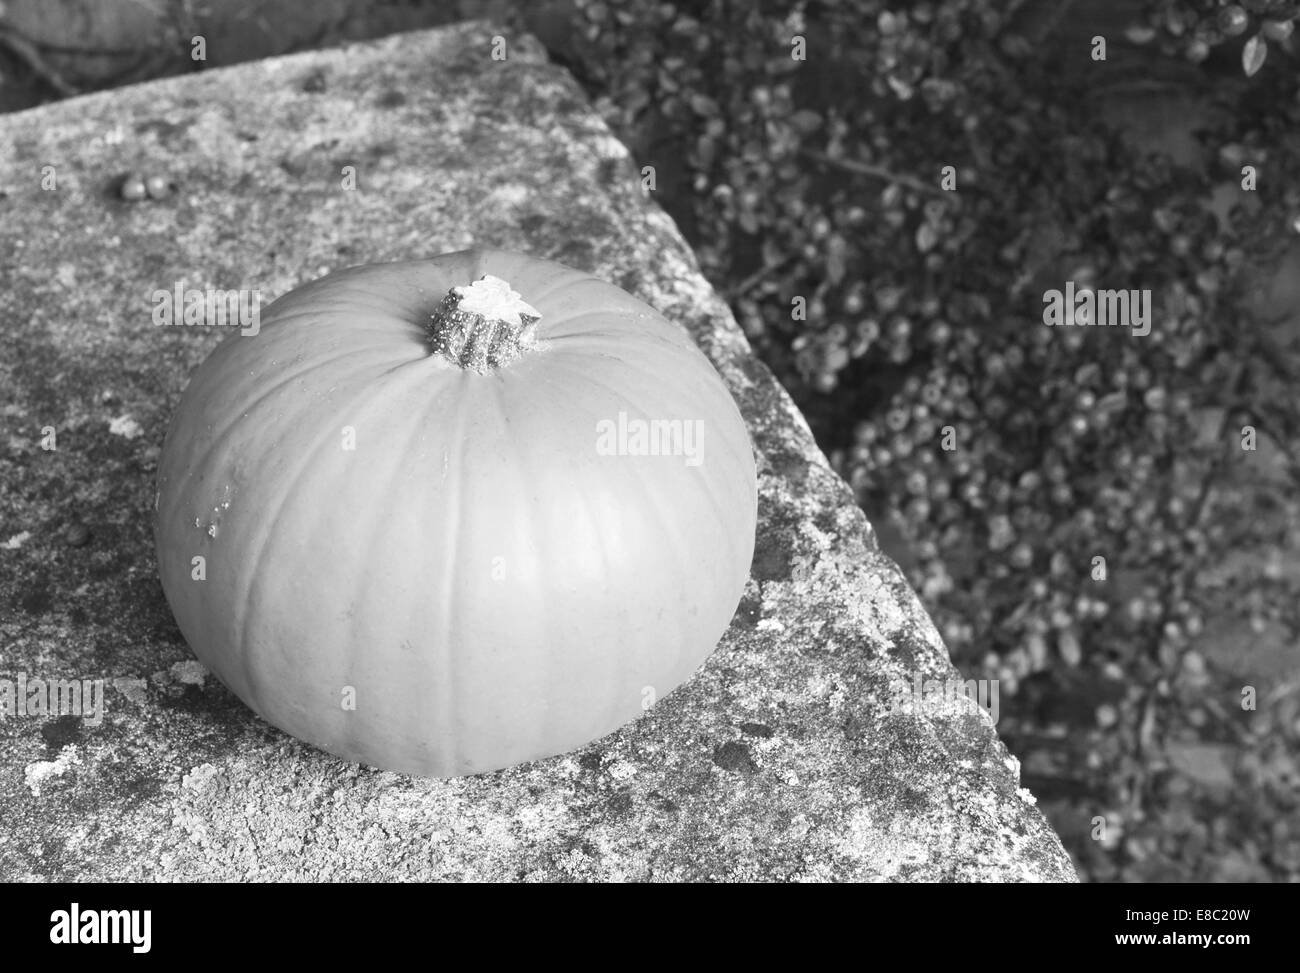 Ripe pumpkin on a stone bench against a background of cotoneaster berries - monochrome processing Stock Photo